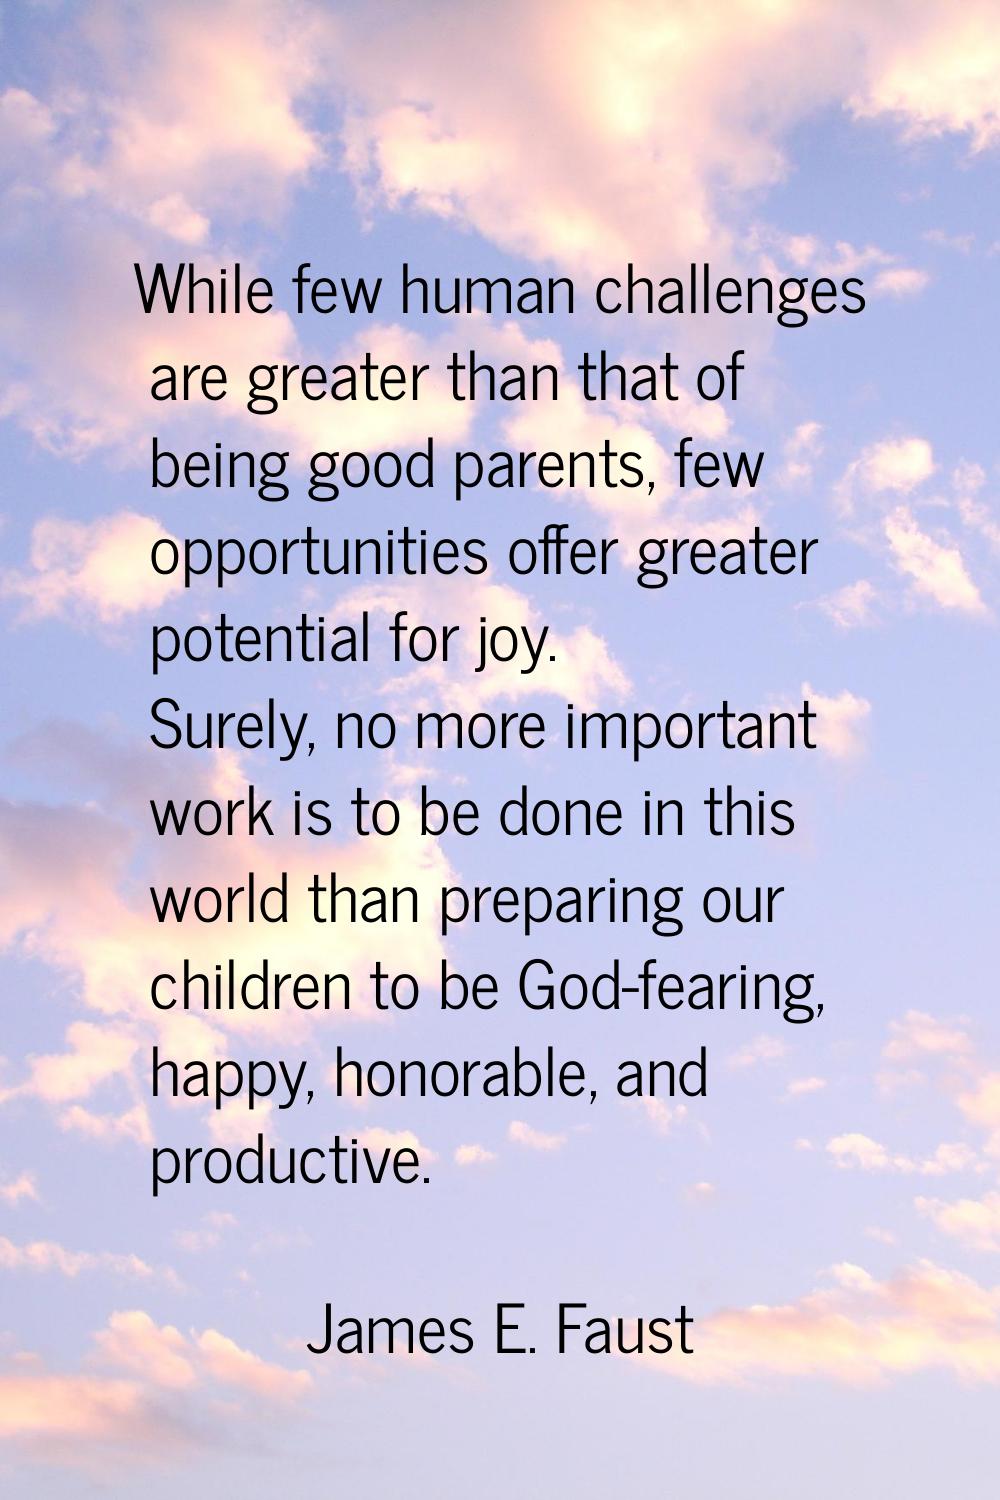 While few human challenges are greater than that of being good parents, few opportunities offer gre